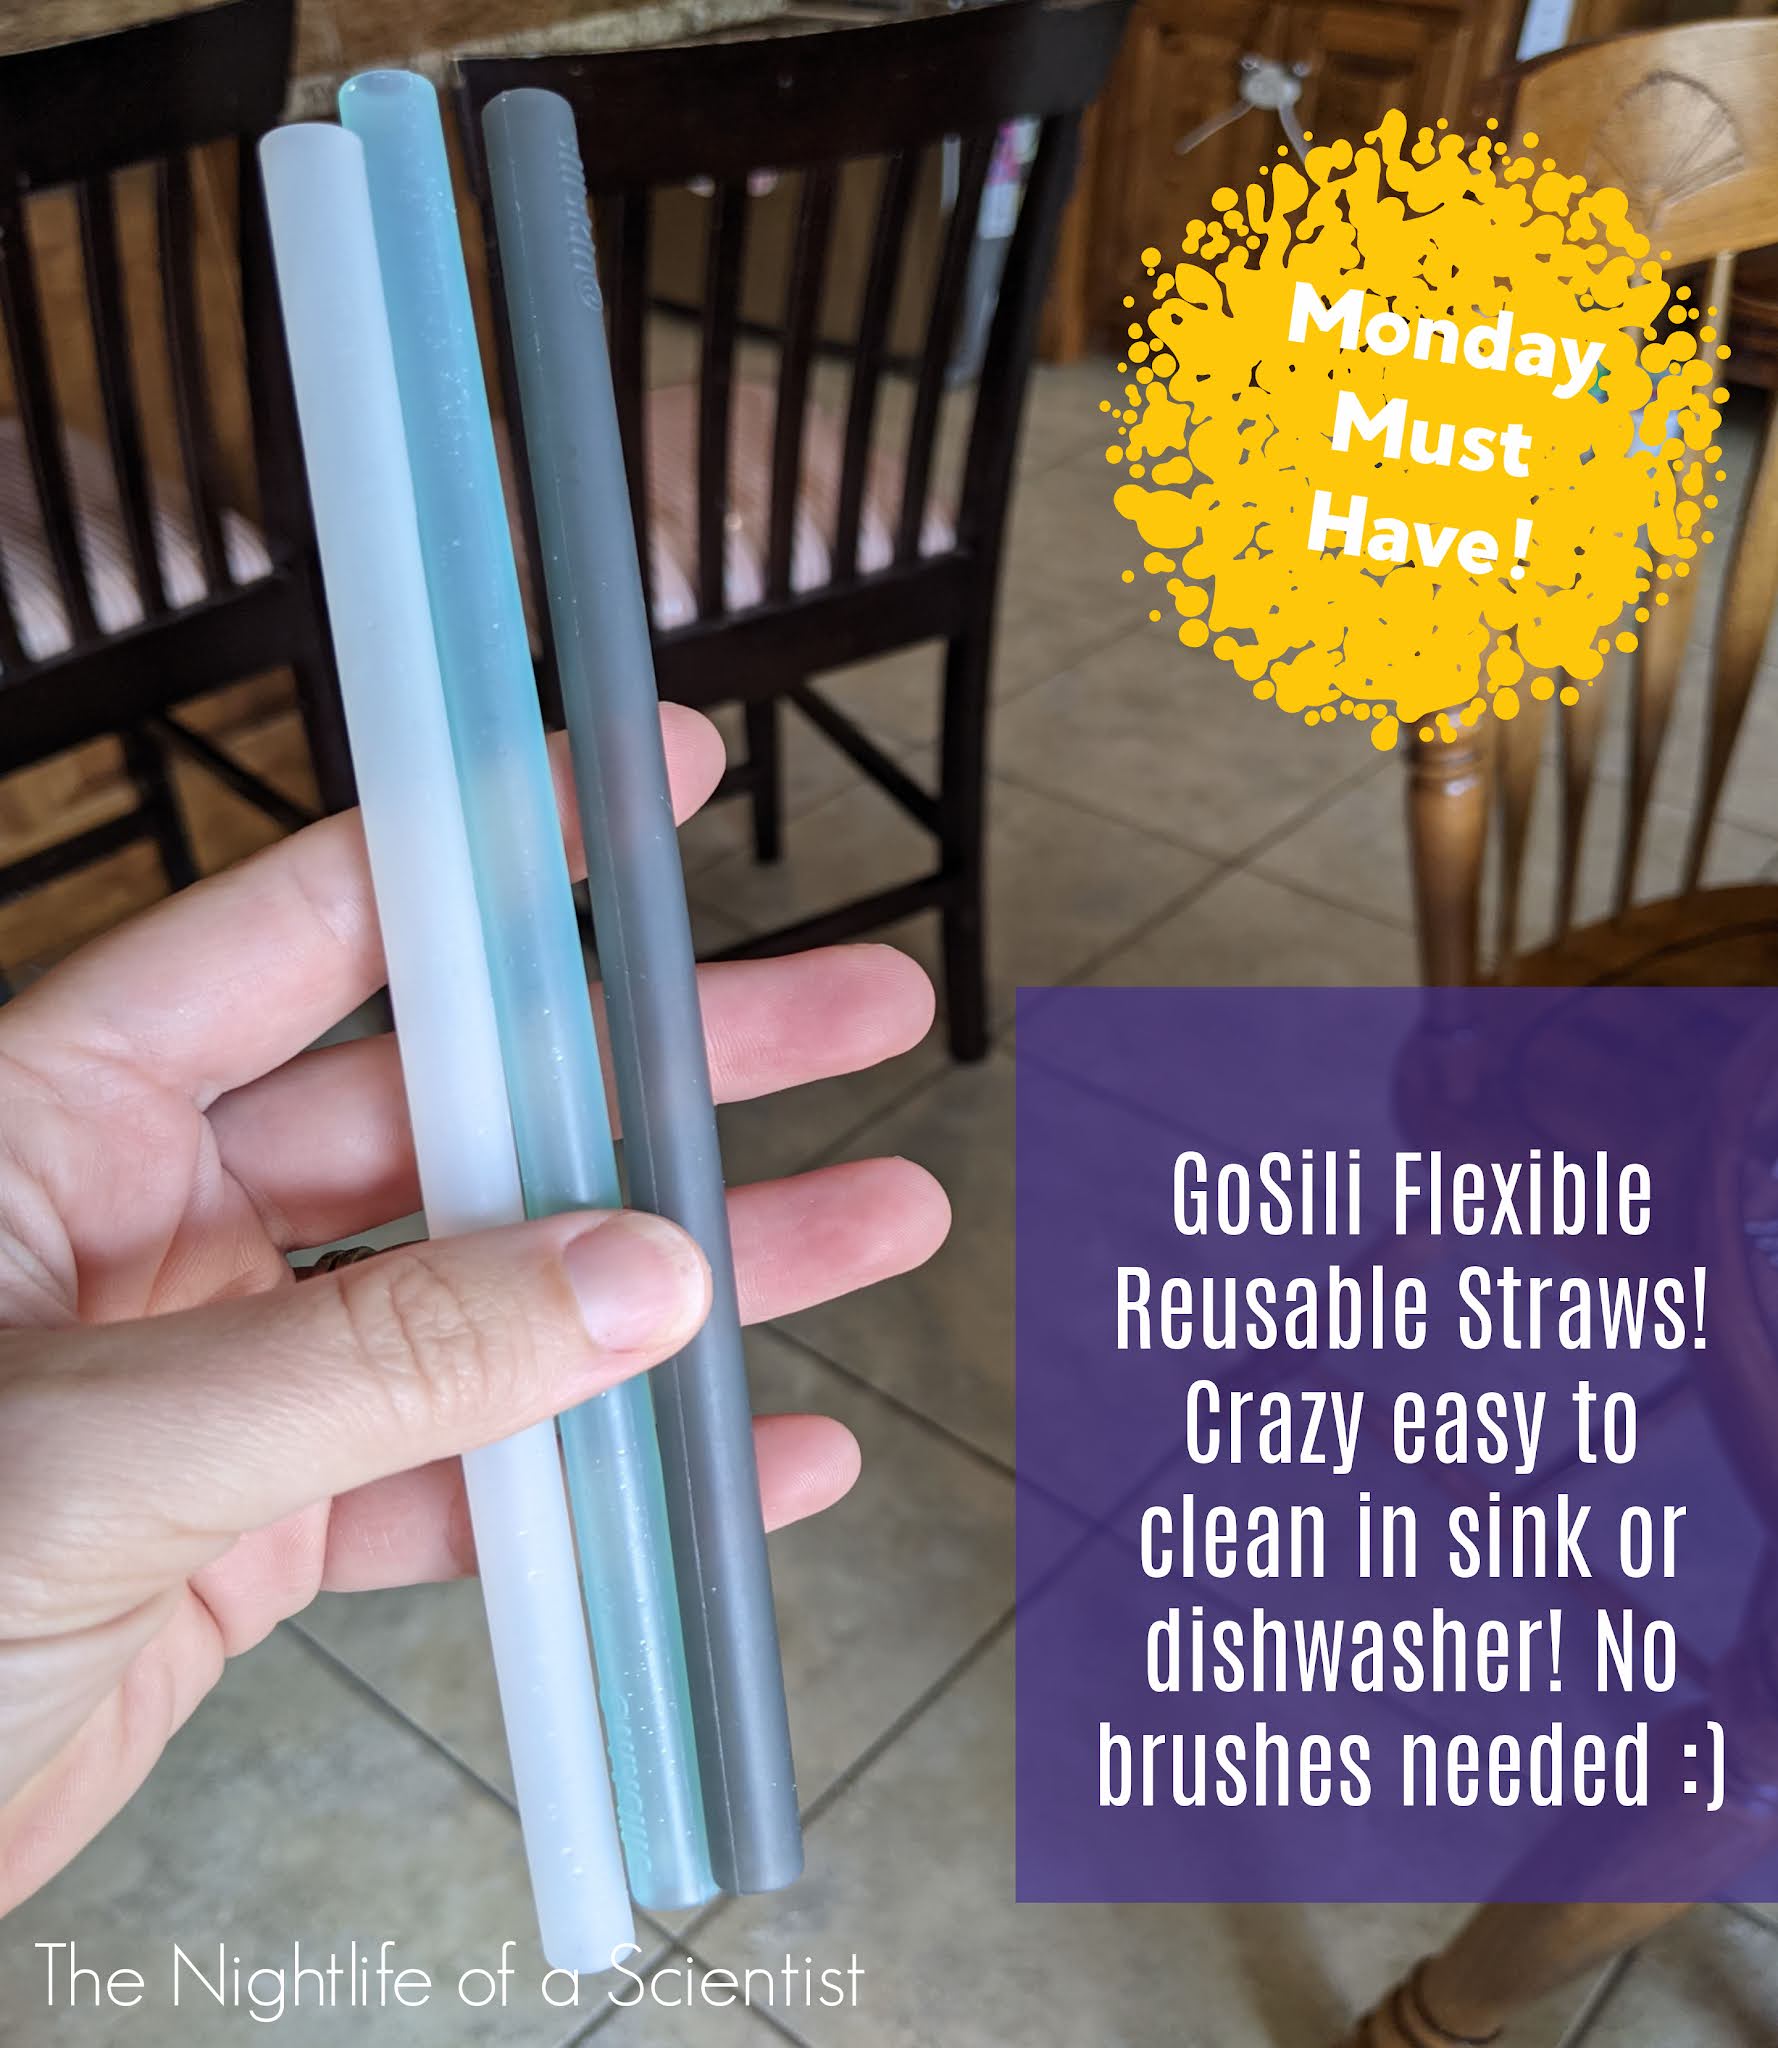 Let's Be Better, One Reusable Straw At A Time. – fightershots